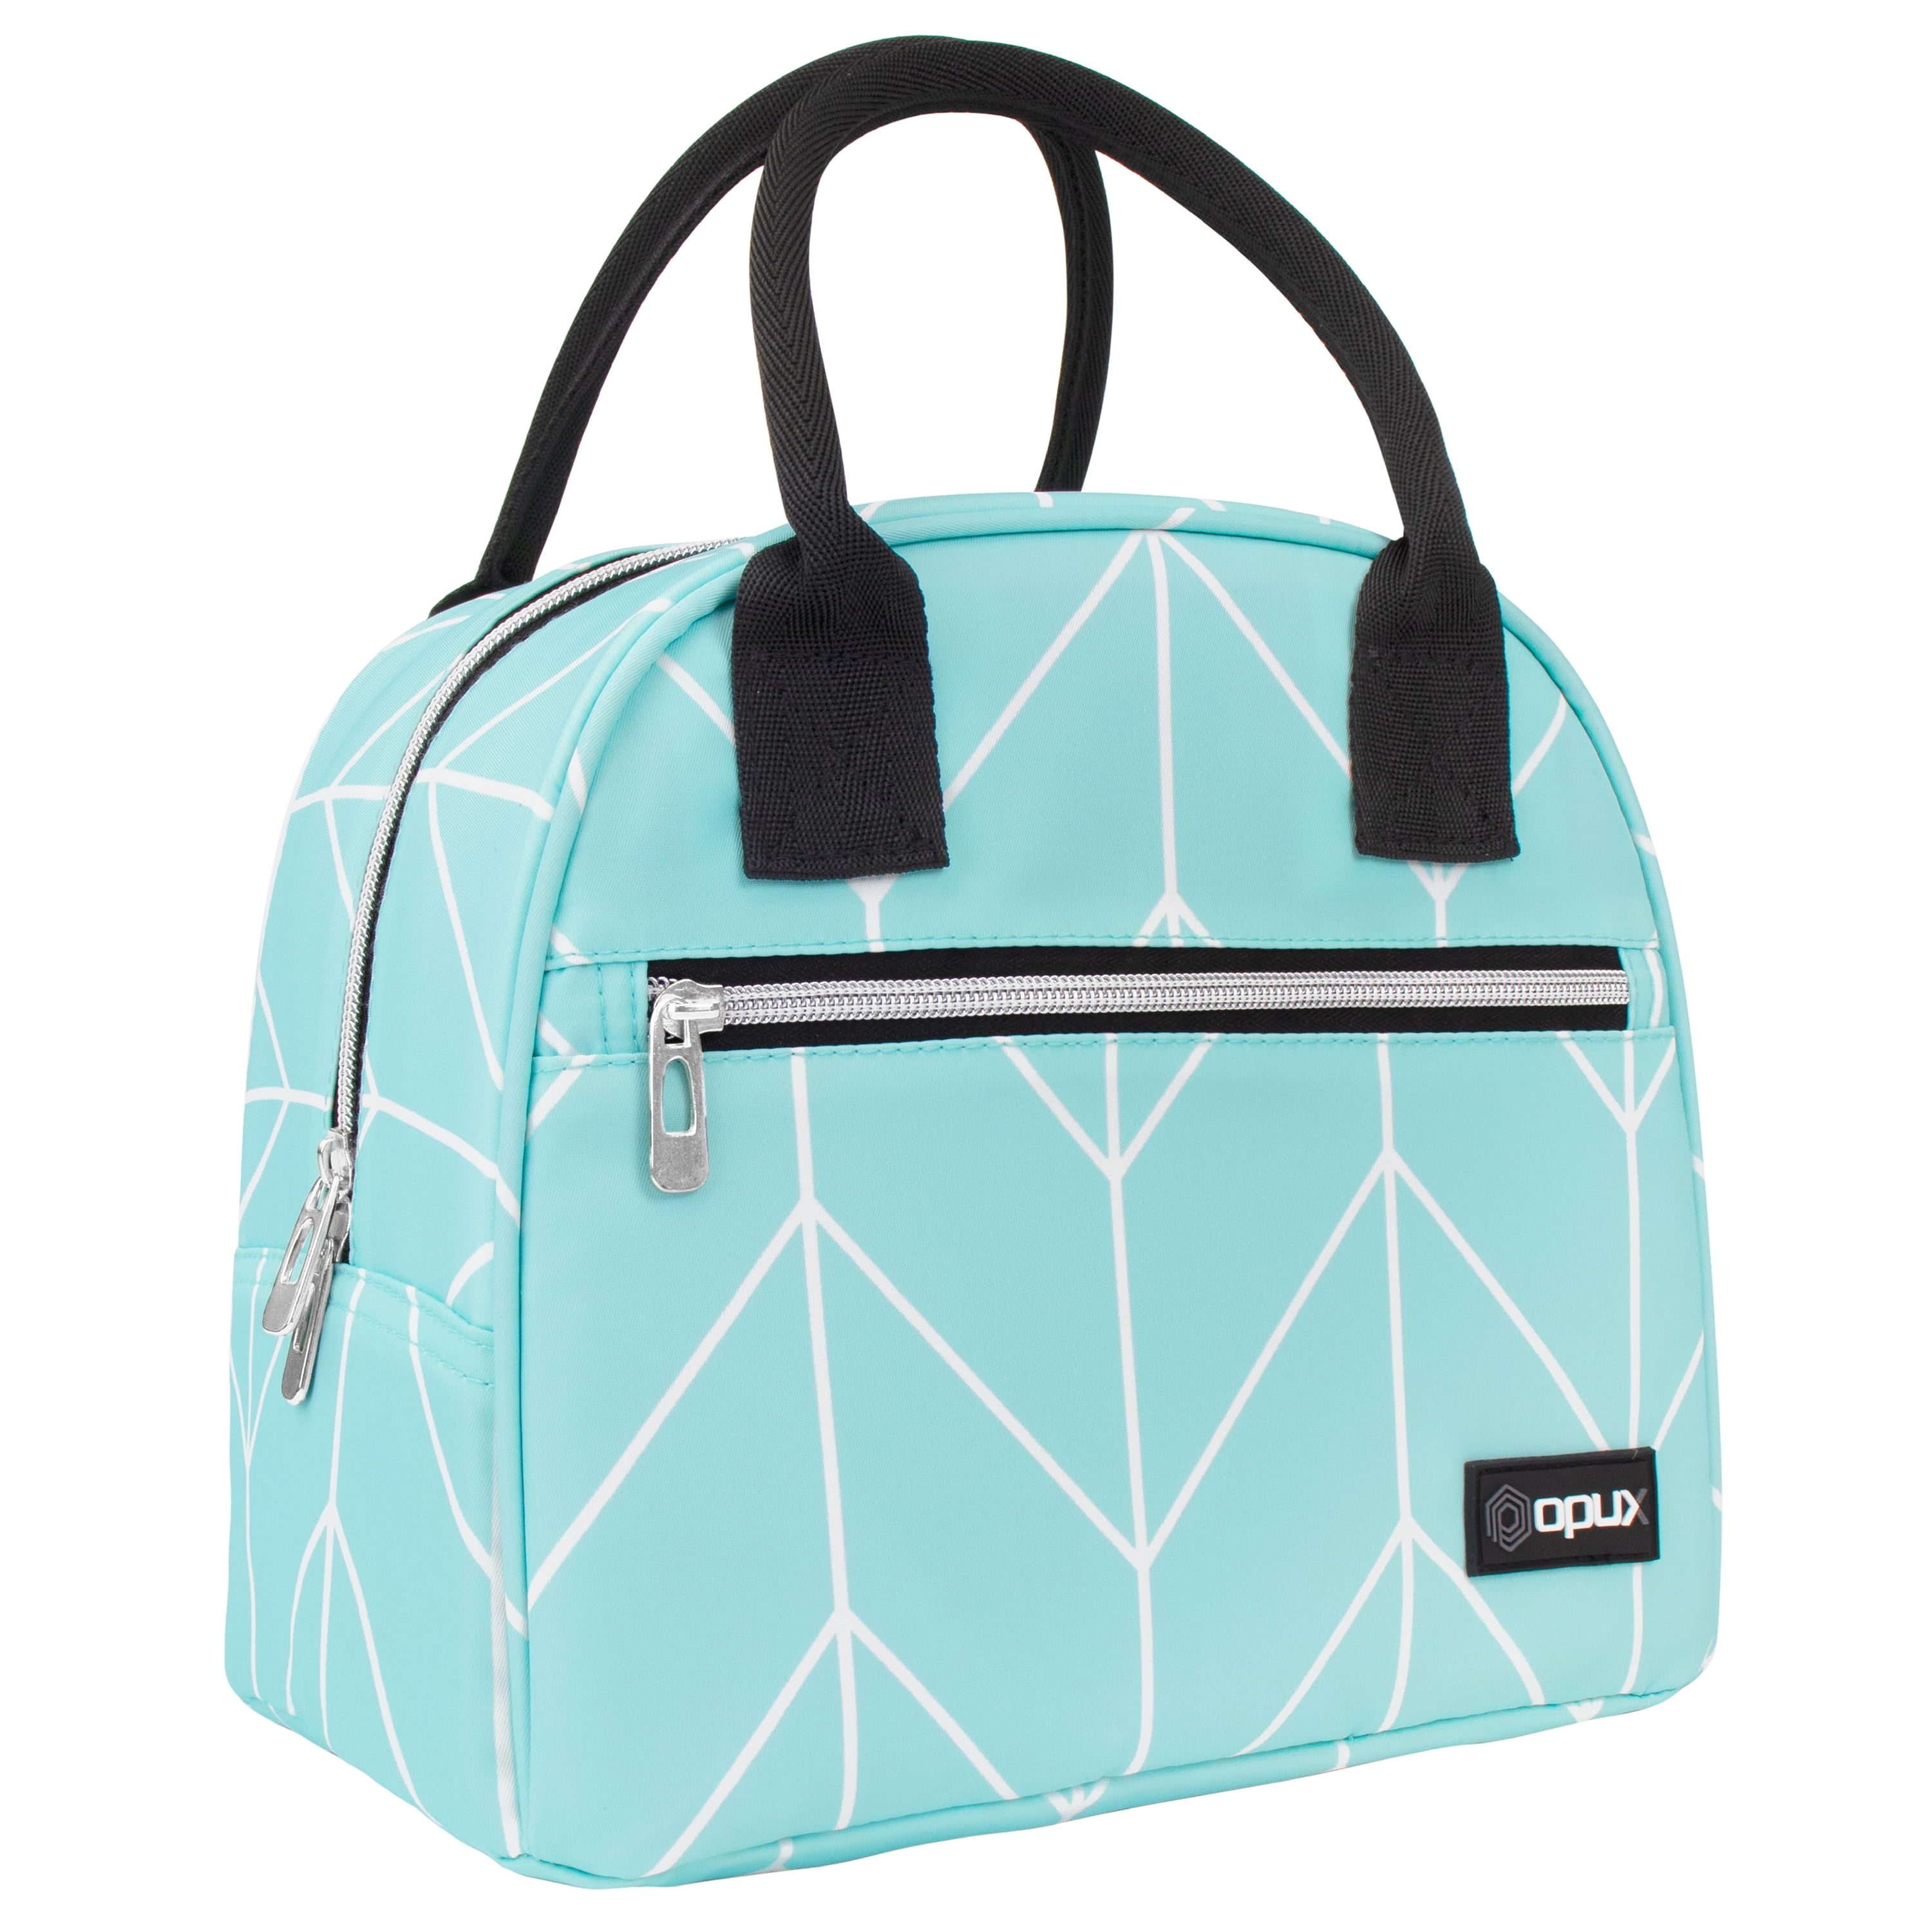 Lunch bags and totes for teens who have outgrown lunch boxes